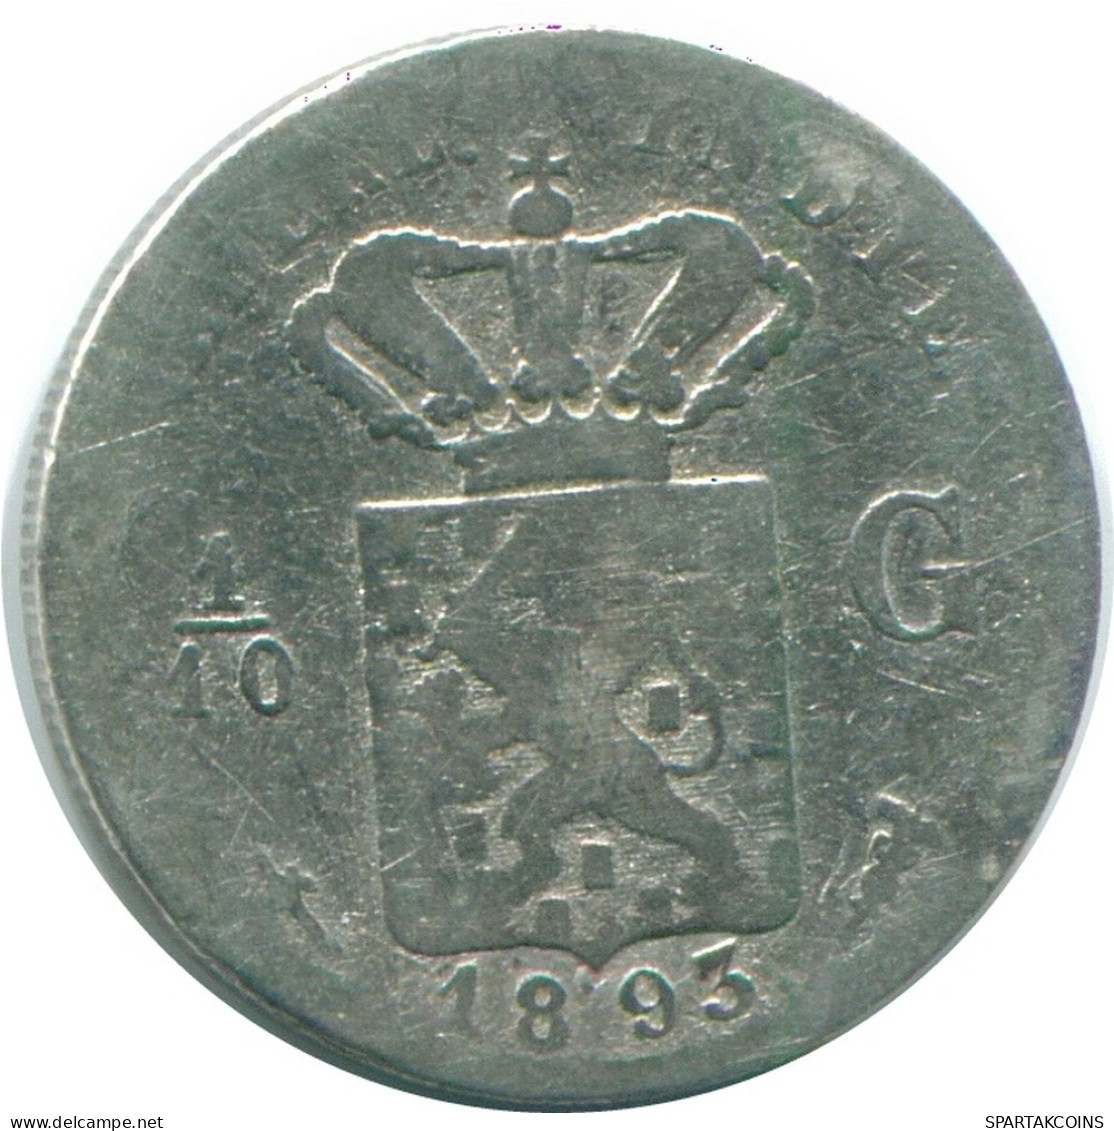 1/10 GULDEN 1893 NETHERLANDS EAST INDIES SILVER Colonial Coin #NL13196.3.U.A - Indes Neerlandesas